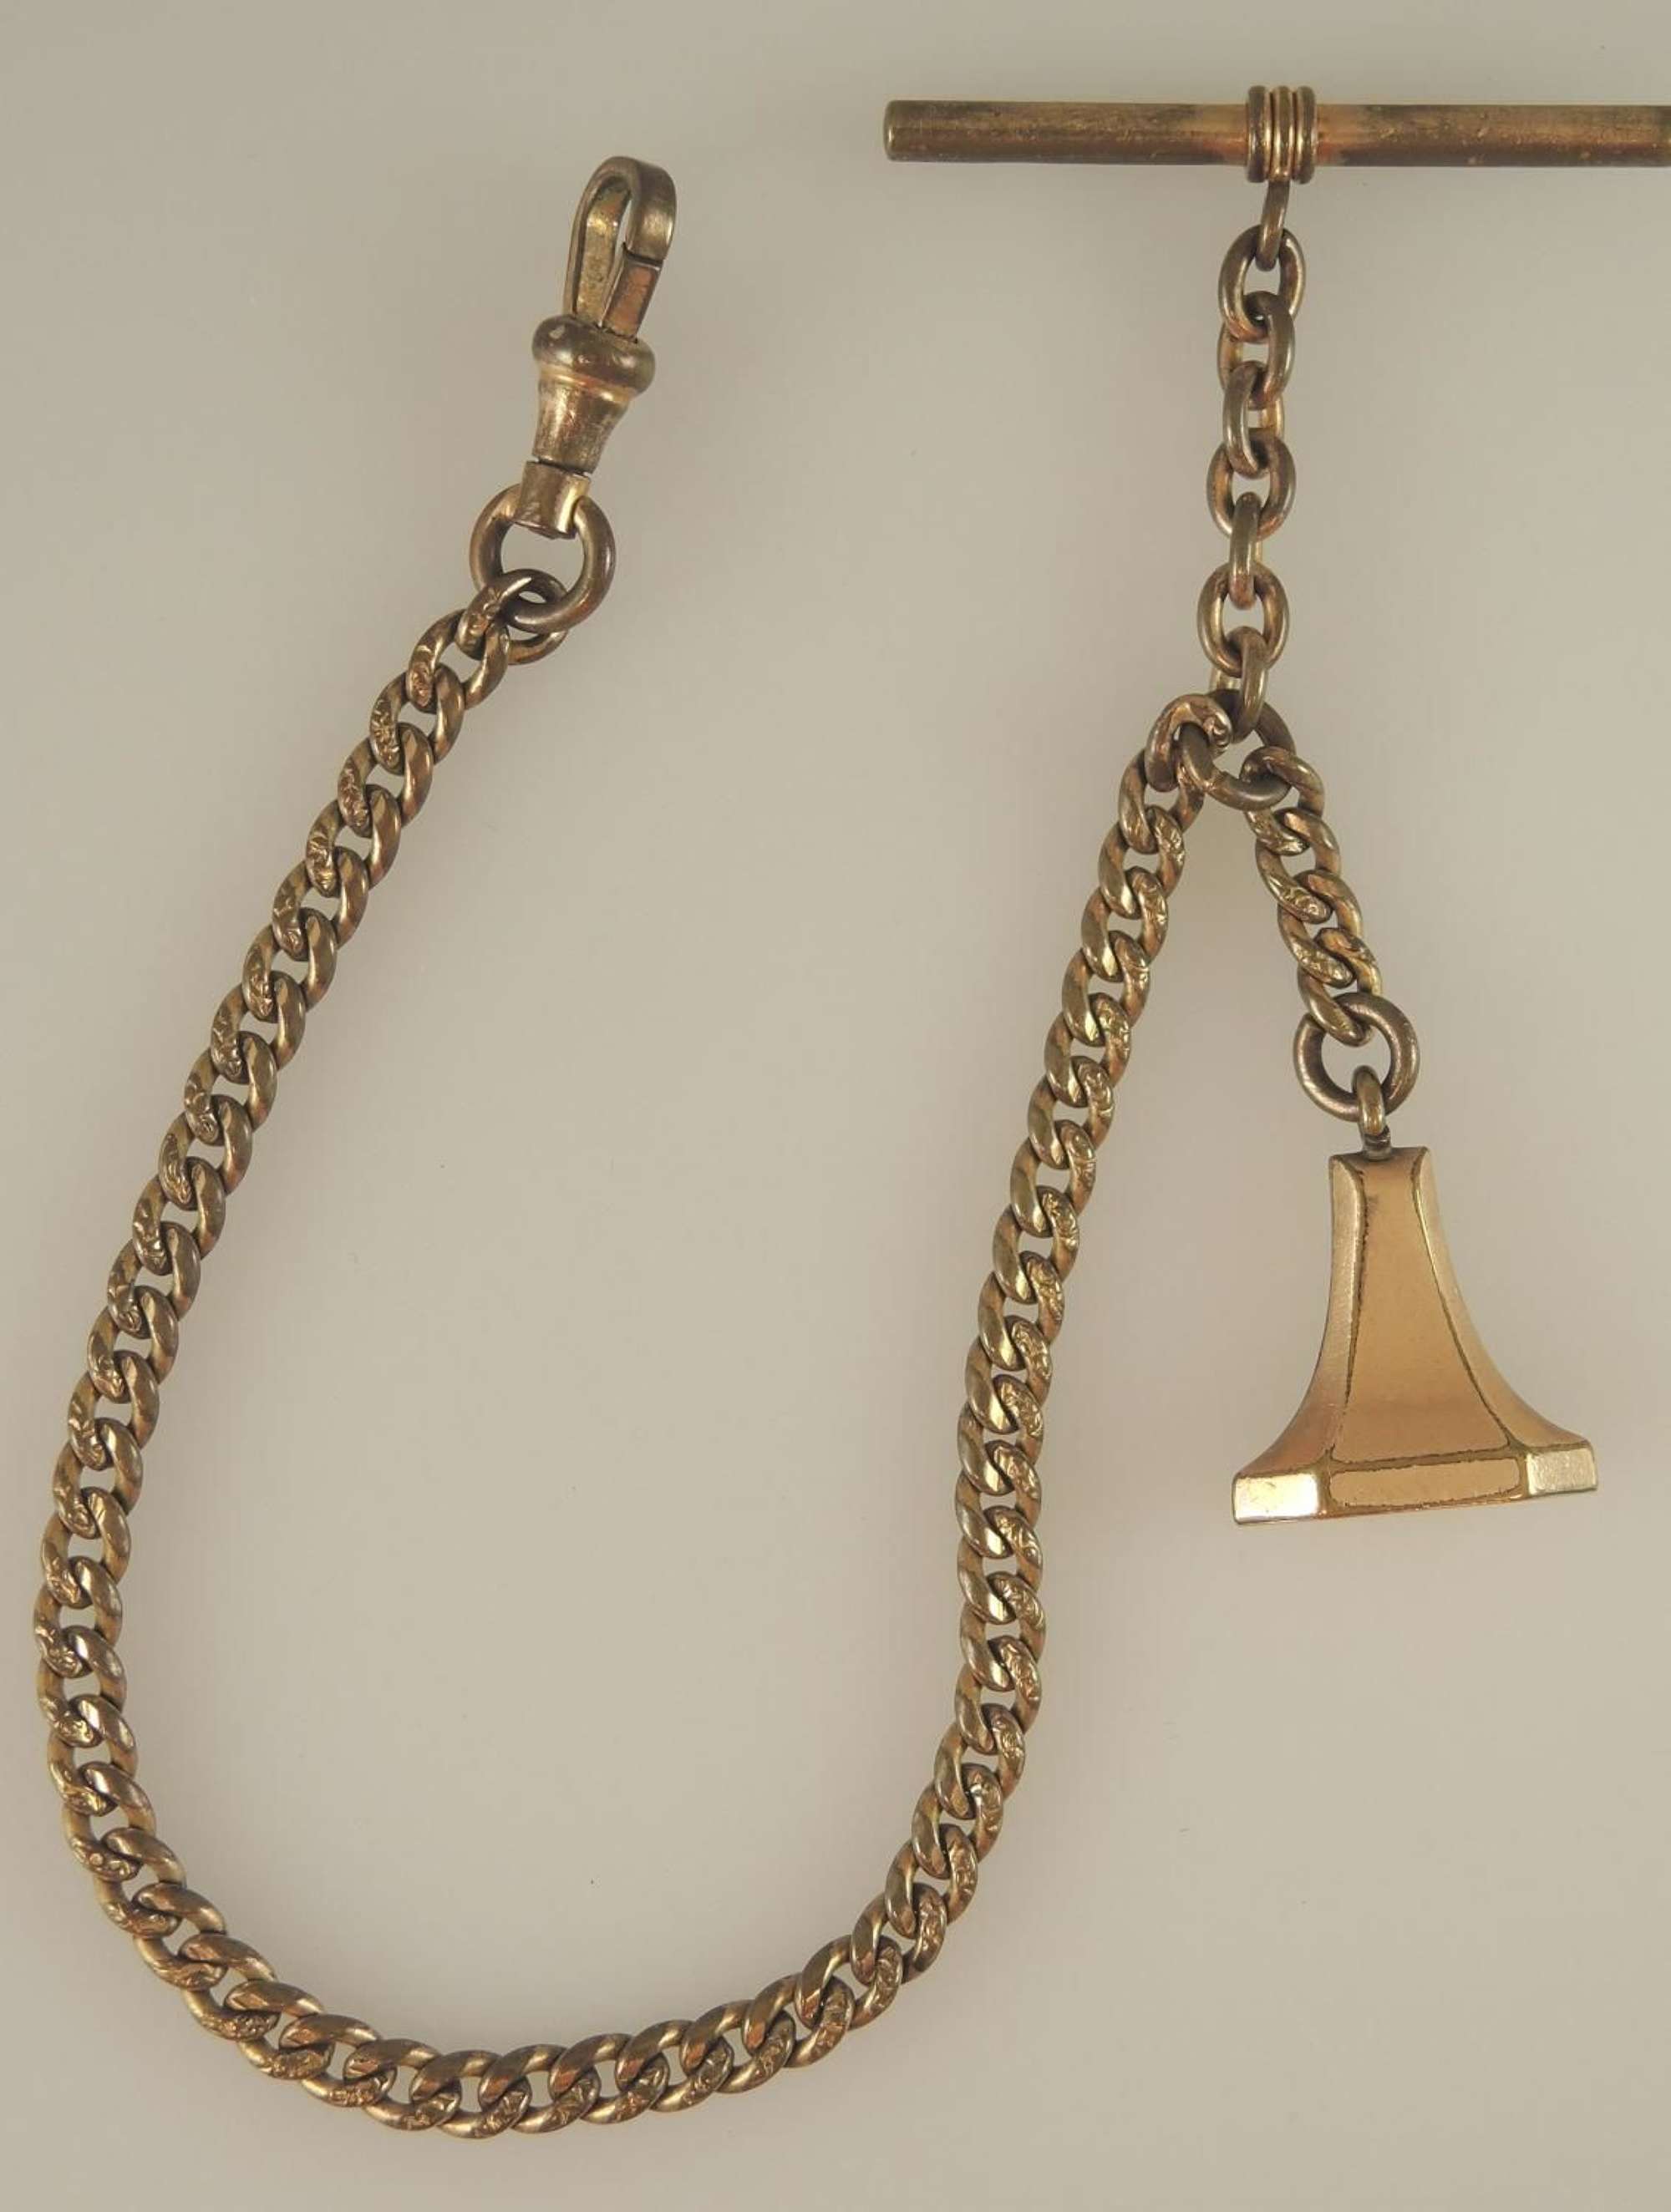 Gold plated watch chain with Seal Fob c1890